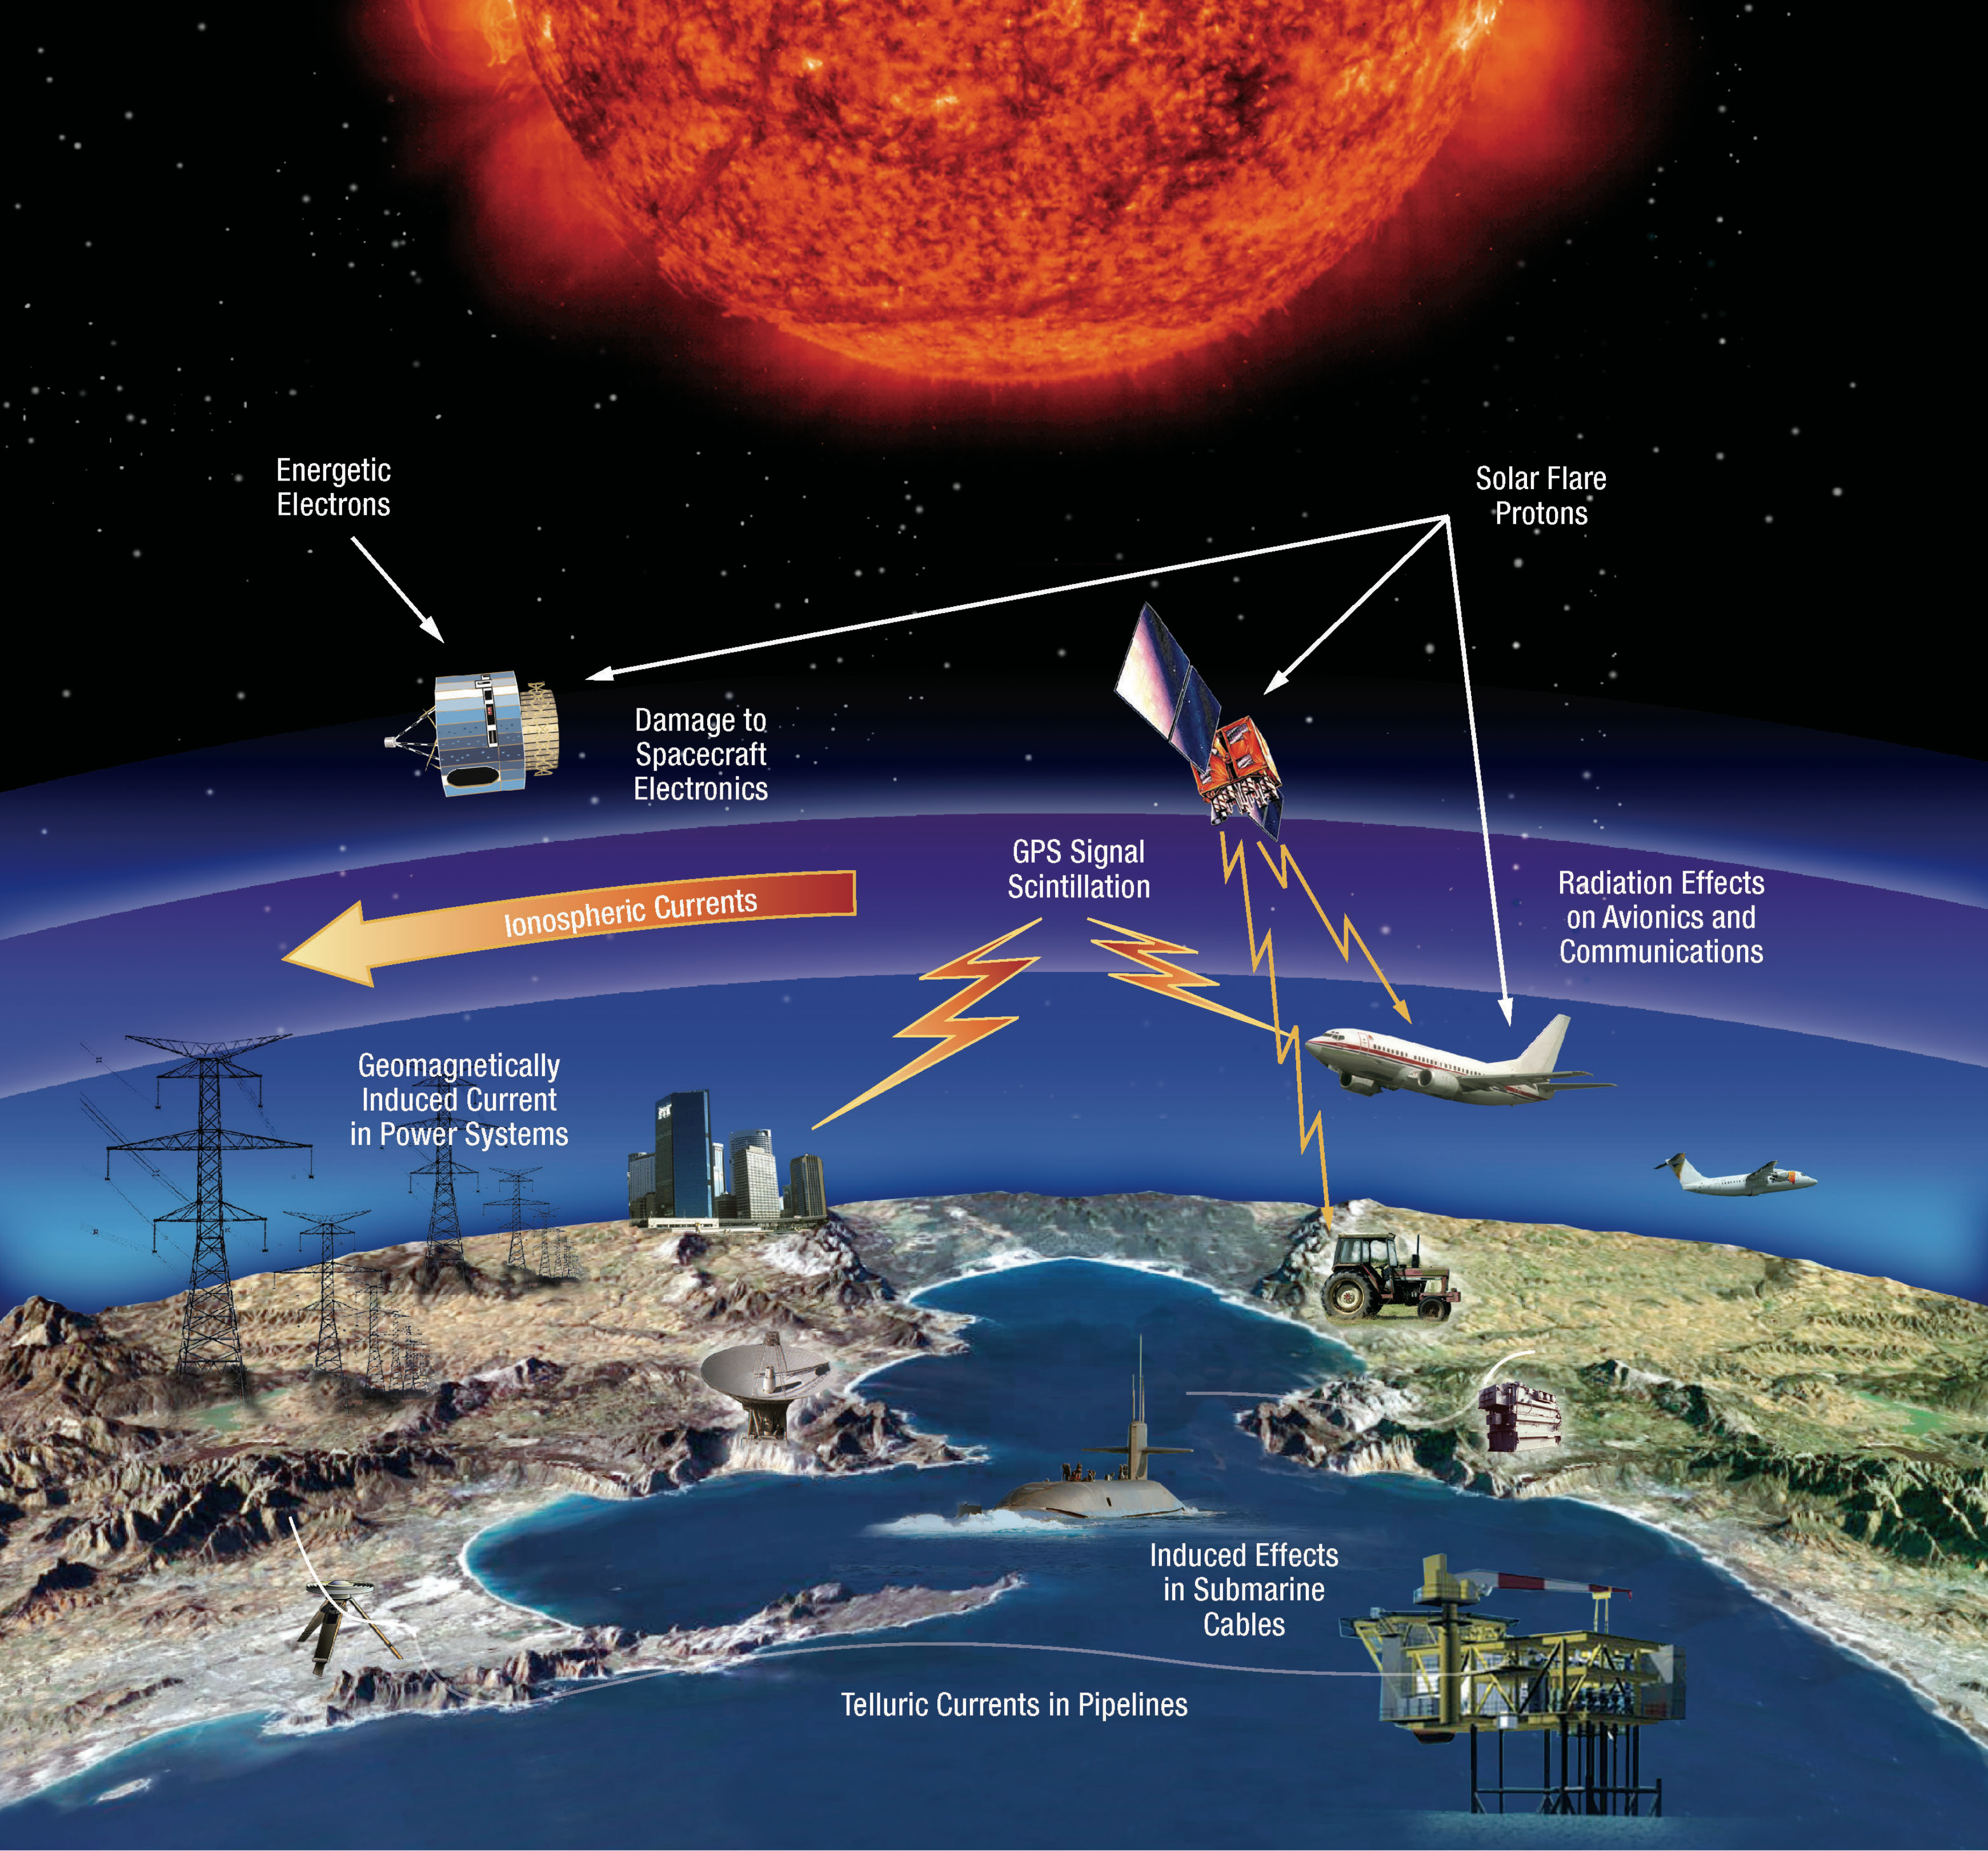 A visualization showing some of the effects the Sun's activity can have on technology and infrastructure. At top of the image, an orange sun in space shows active flares. Energetic electrons are shown damaging spacecraft electronics orbiting Earth. Solar flare protons are also shown damaging orbiting spacecraft electronics, but also causing radiation effects on avionics and communications and GPS signal scintillation. On land, enlarged power lines represent geomagnetically induced currents in power systems. In water, enlarged images of a submarine and offshore pipeline facility represent induced effects in submarine cables and telluric currents in pipelines, respectively.